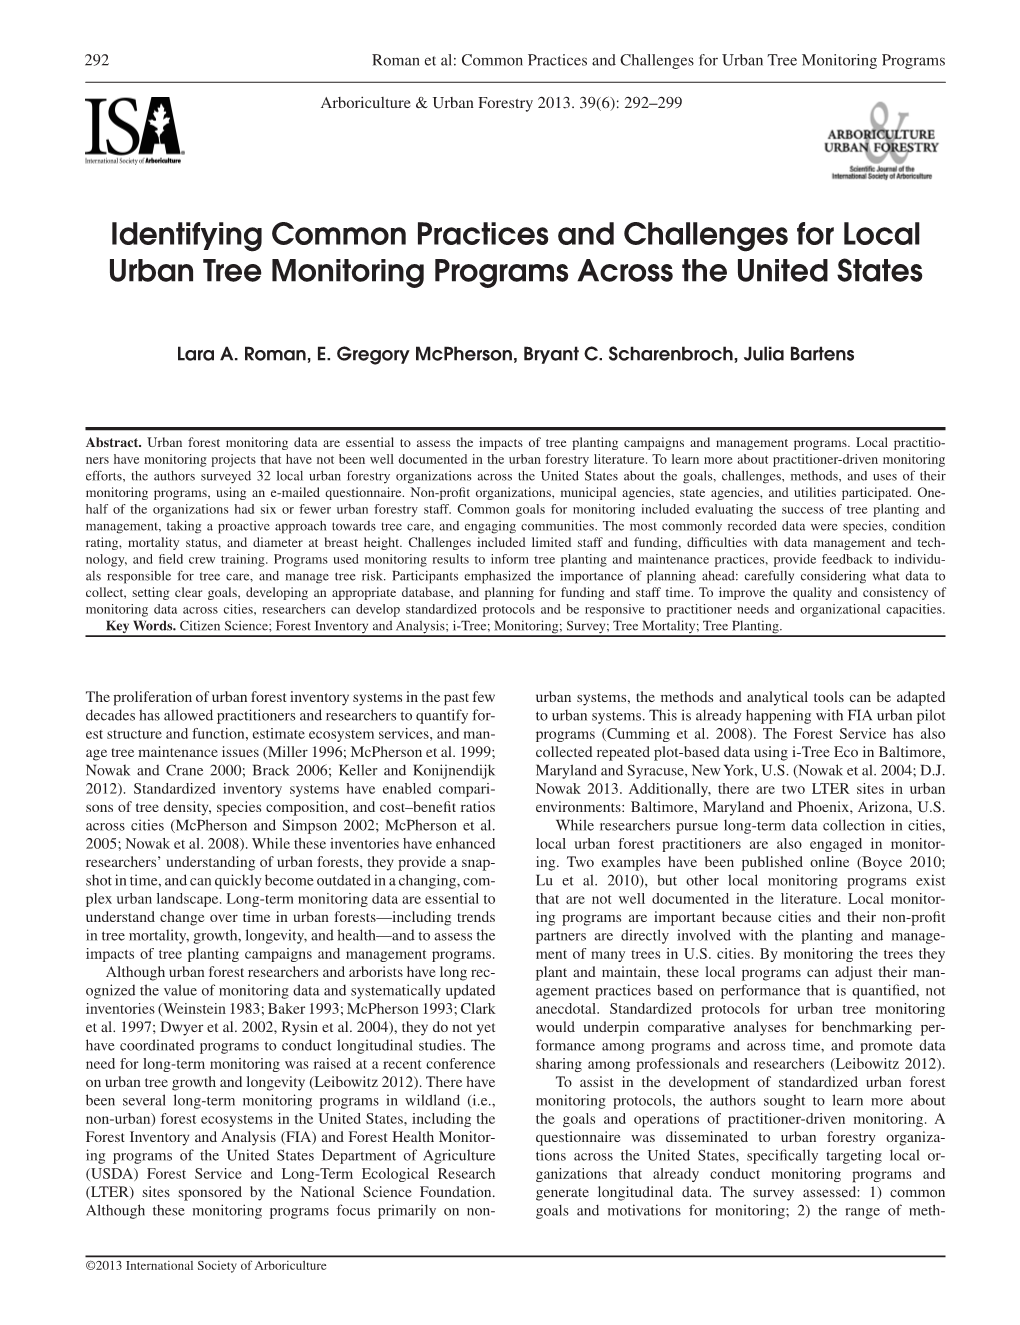 Identifying Common Practices and Challenges for Local Urban Tree Monitoring Programs Across the United States